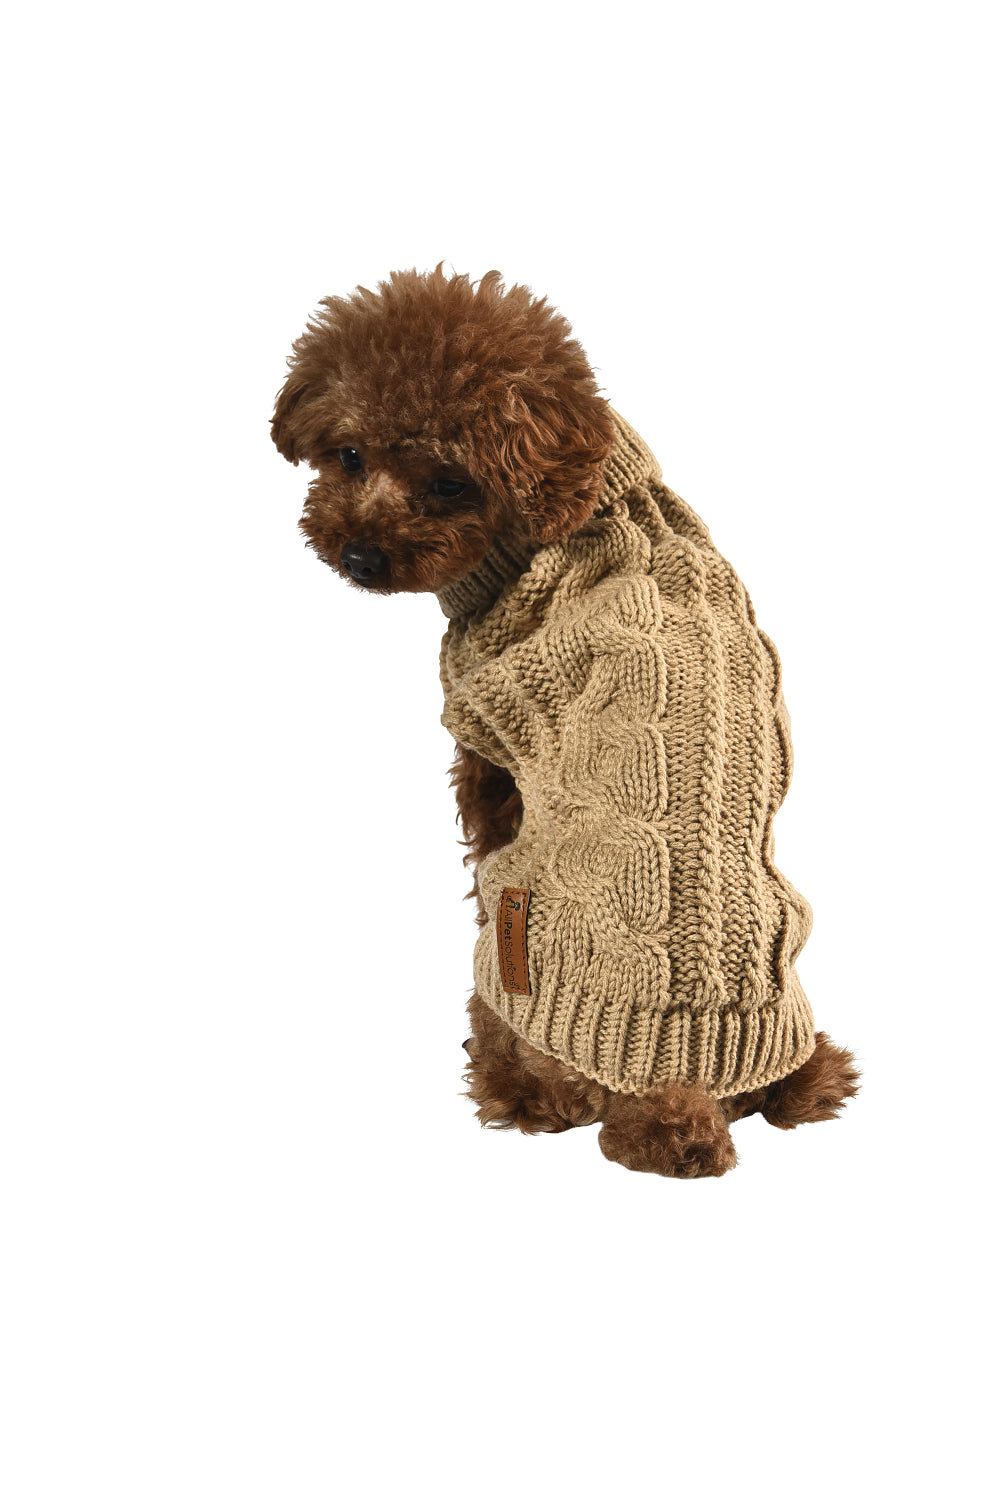 Dog Luxury Knitted Fitted Warm Jumper in Grey Brown Cream Sizes 25,35,40Cm S/M/L